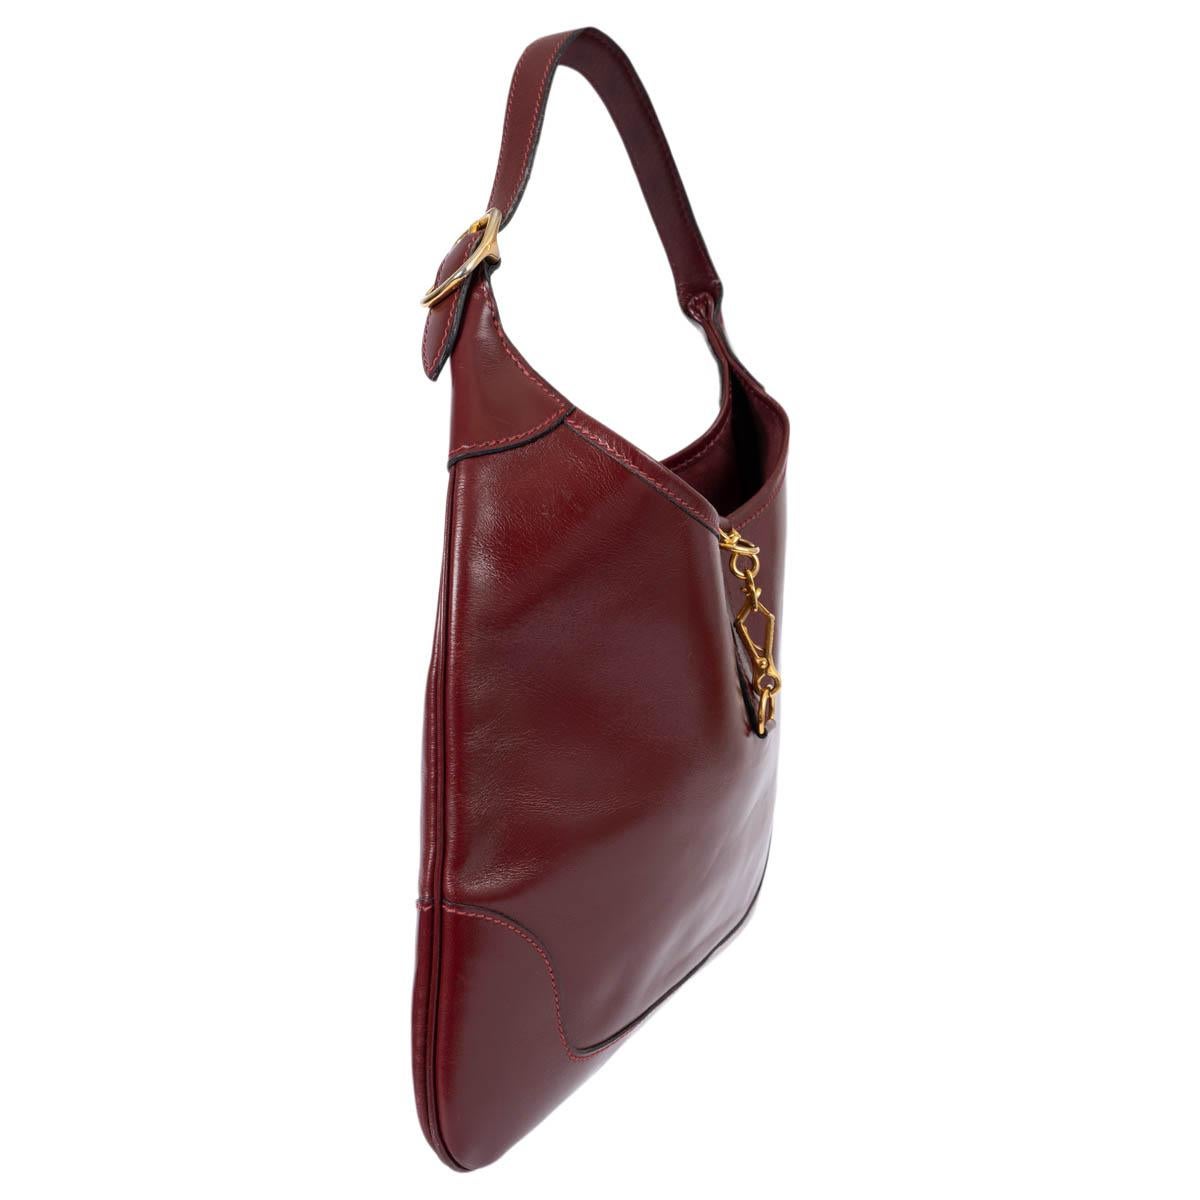 100% authentic Hermès Trim 31 hobo in Rouge H (burgundy) Veau Box leather. Features gold-plated hardware. Lined in suede. Vintage bag, has been carried and is in excellent condition. 

Measurements
Height	21.5cm (8.4in)
Width	30cm